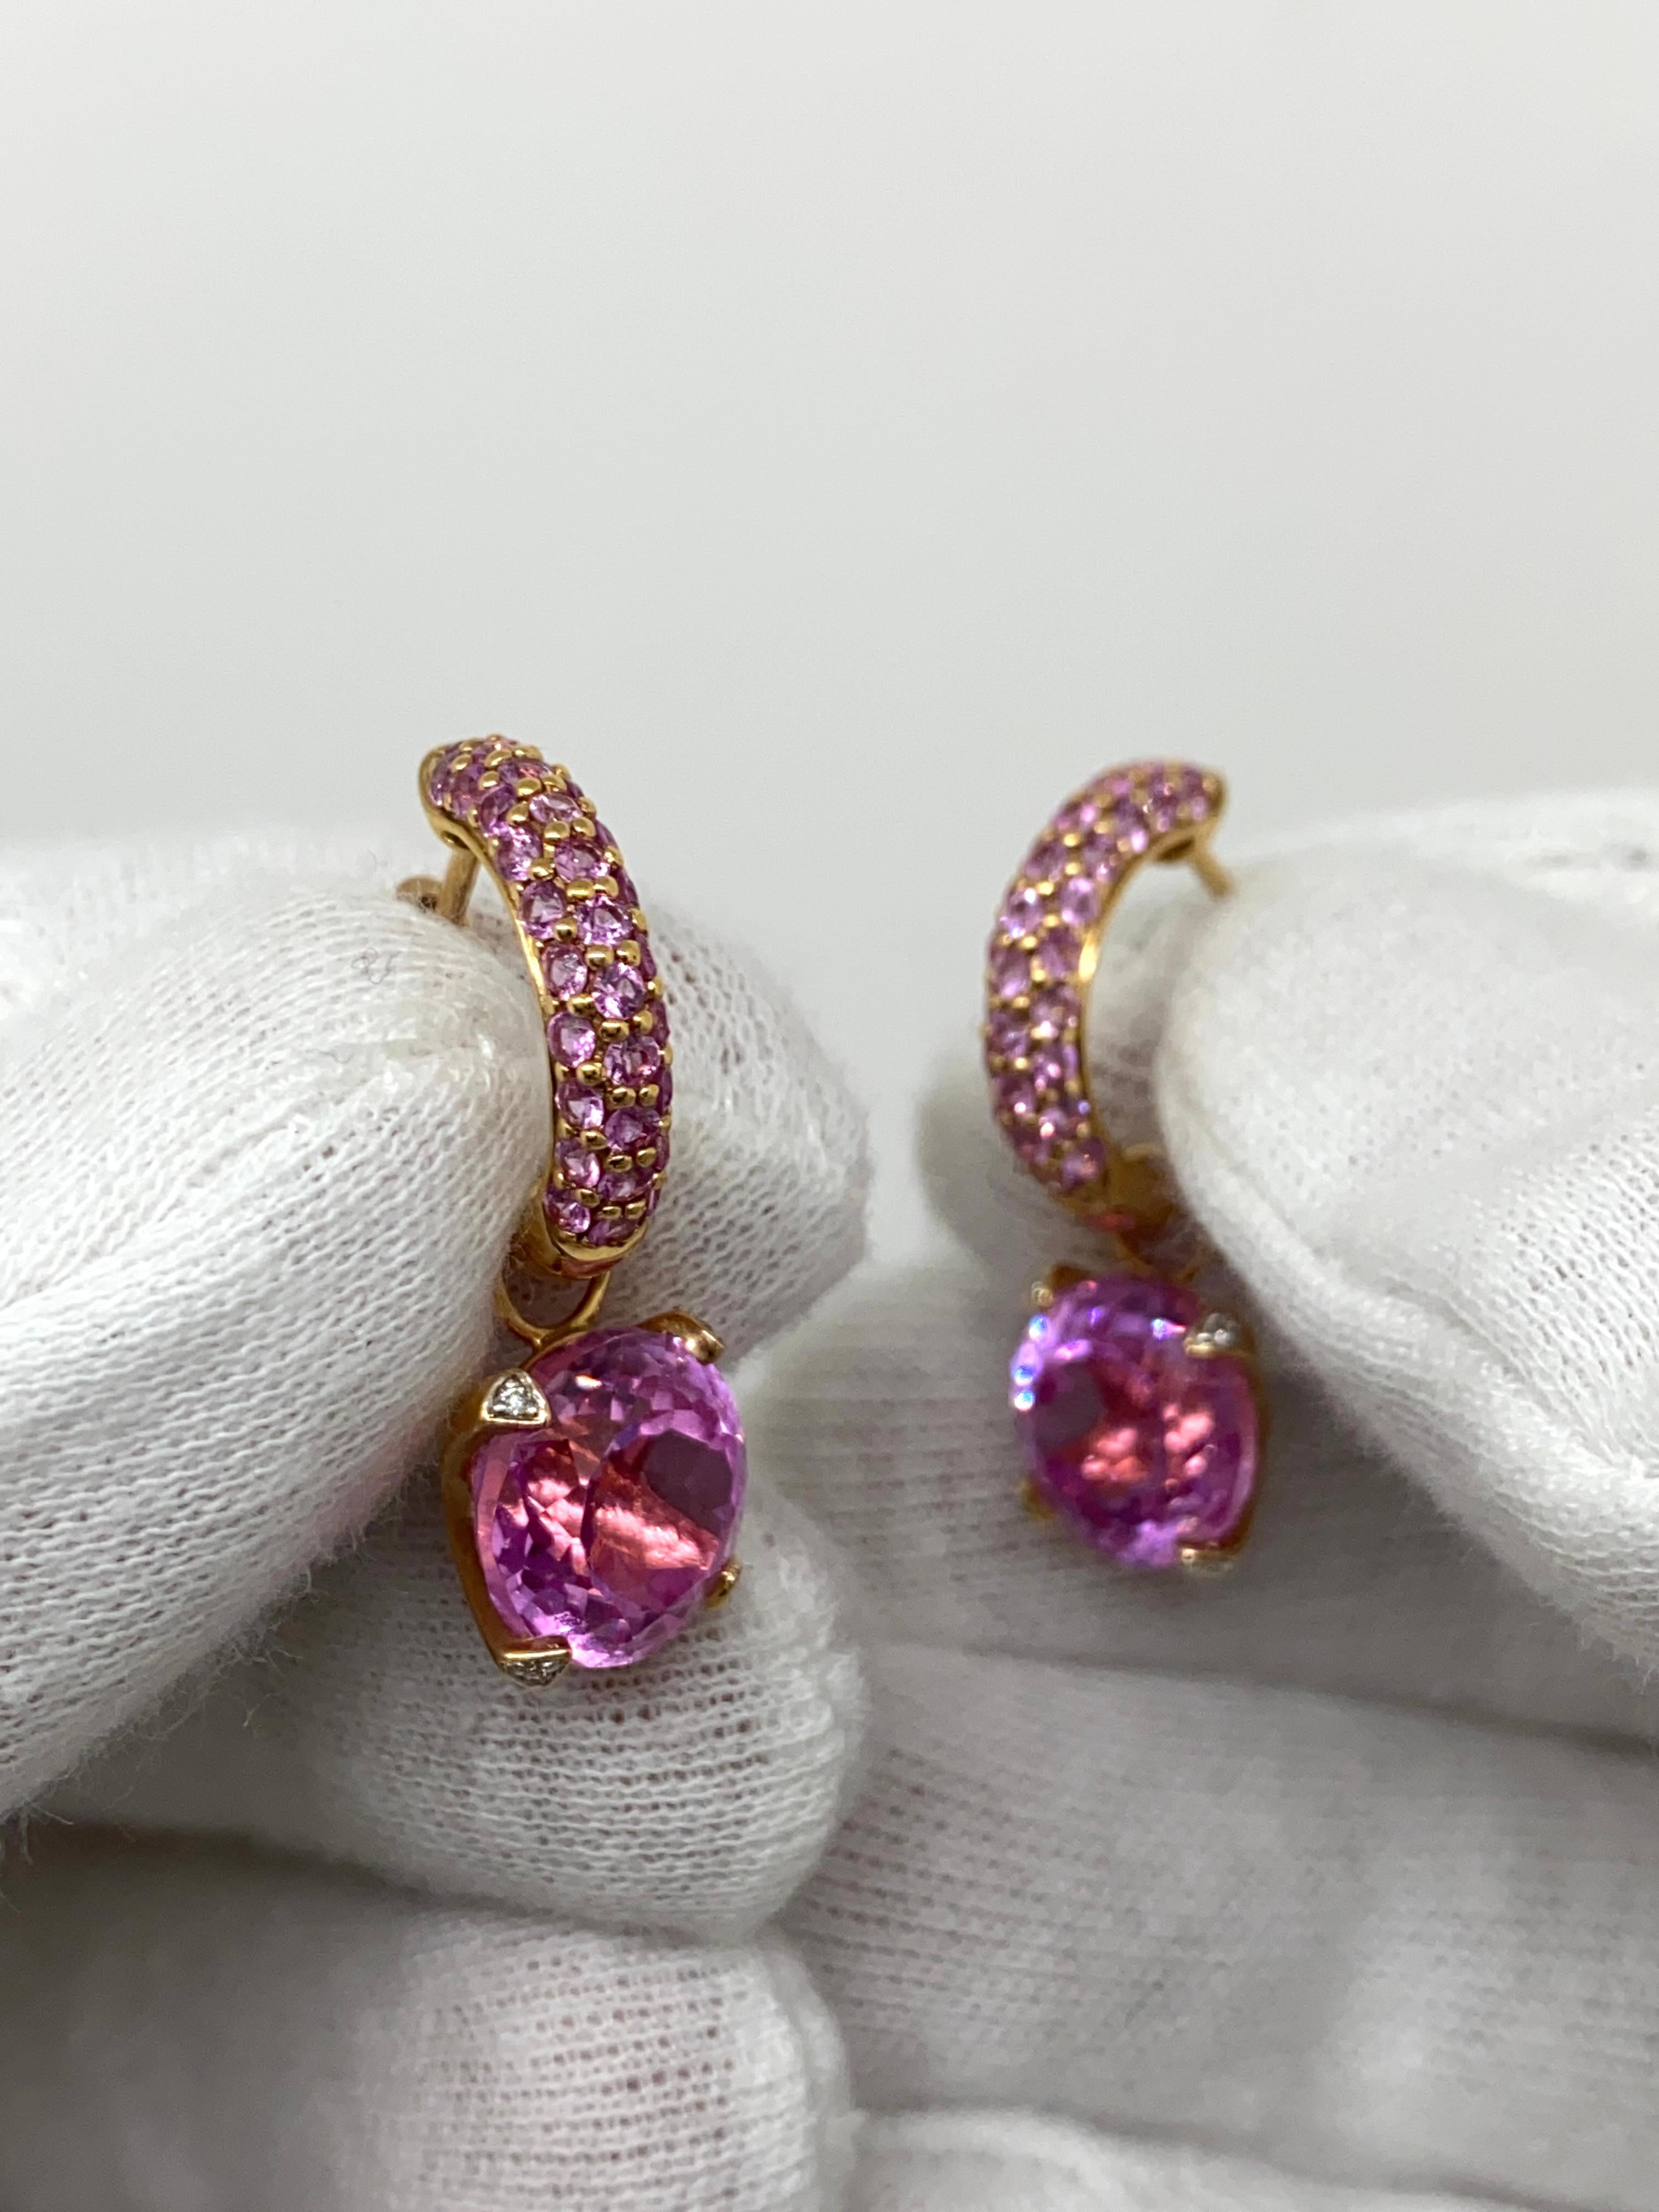 Drop earrings made of 18 kt rose gold with pink natural sapphires for ct.1.39 and pink hydrothermal quartz and white brilliant-cut diamonds for ct.0.02

Welcome to our jewelry collection, where every piece tells a story of timeless elegance and